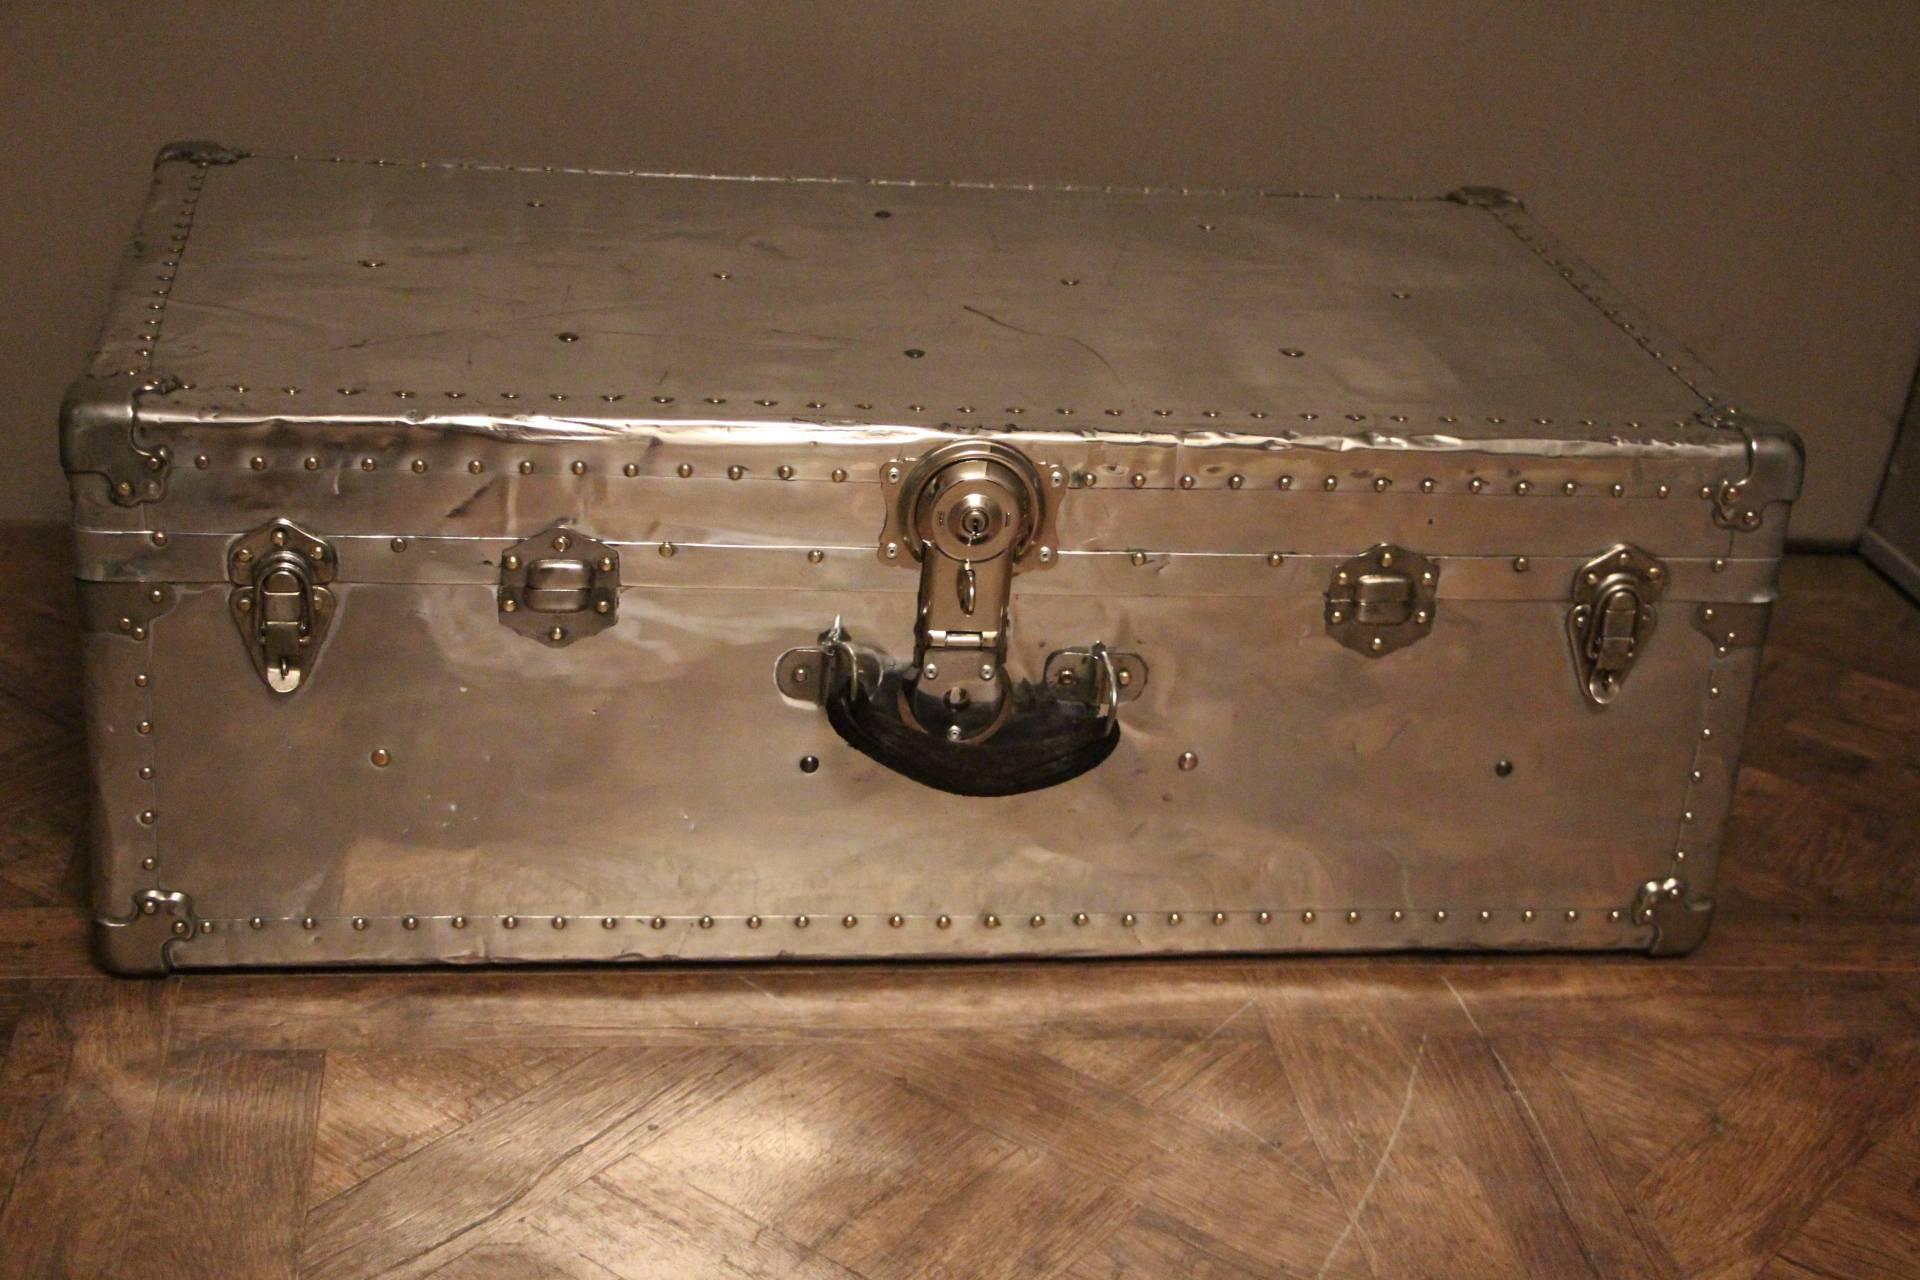 Beautiful mirror polished aluminum steamer trunk featuring steel corners, steel studs, steel locks and leather side handles. This piece of luggage could be a perfect coffee table in all styles of interiors.Leather handles and golden brass studs.
It